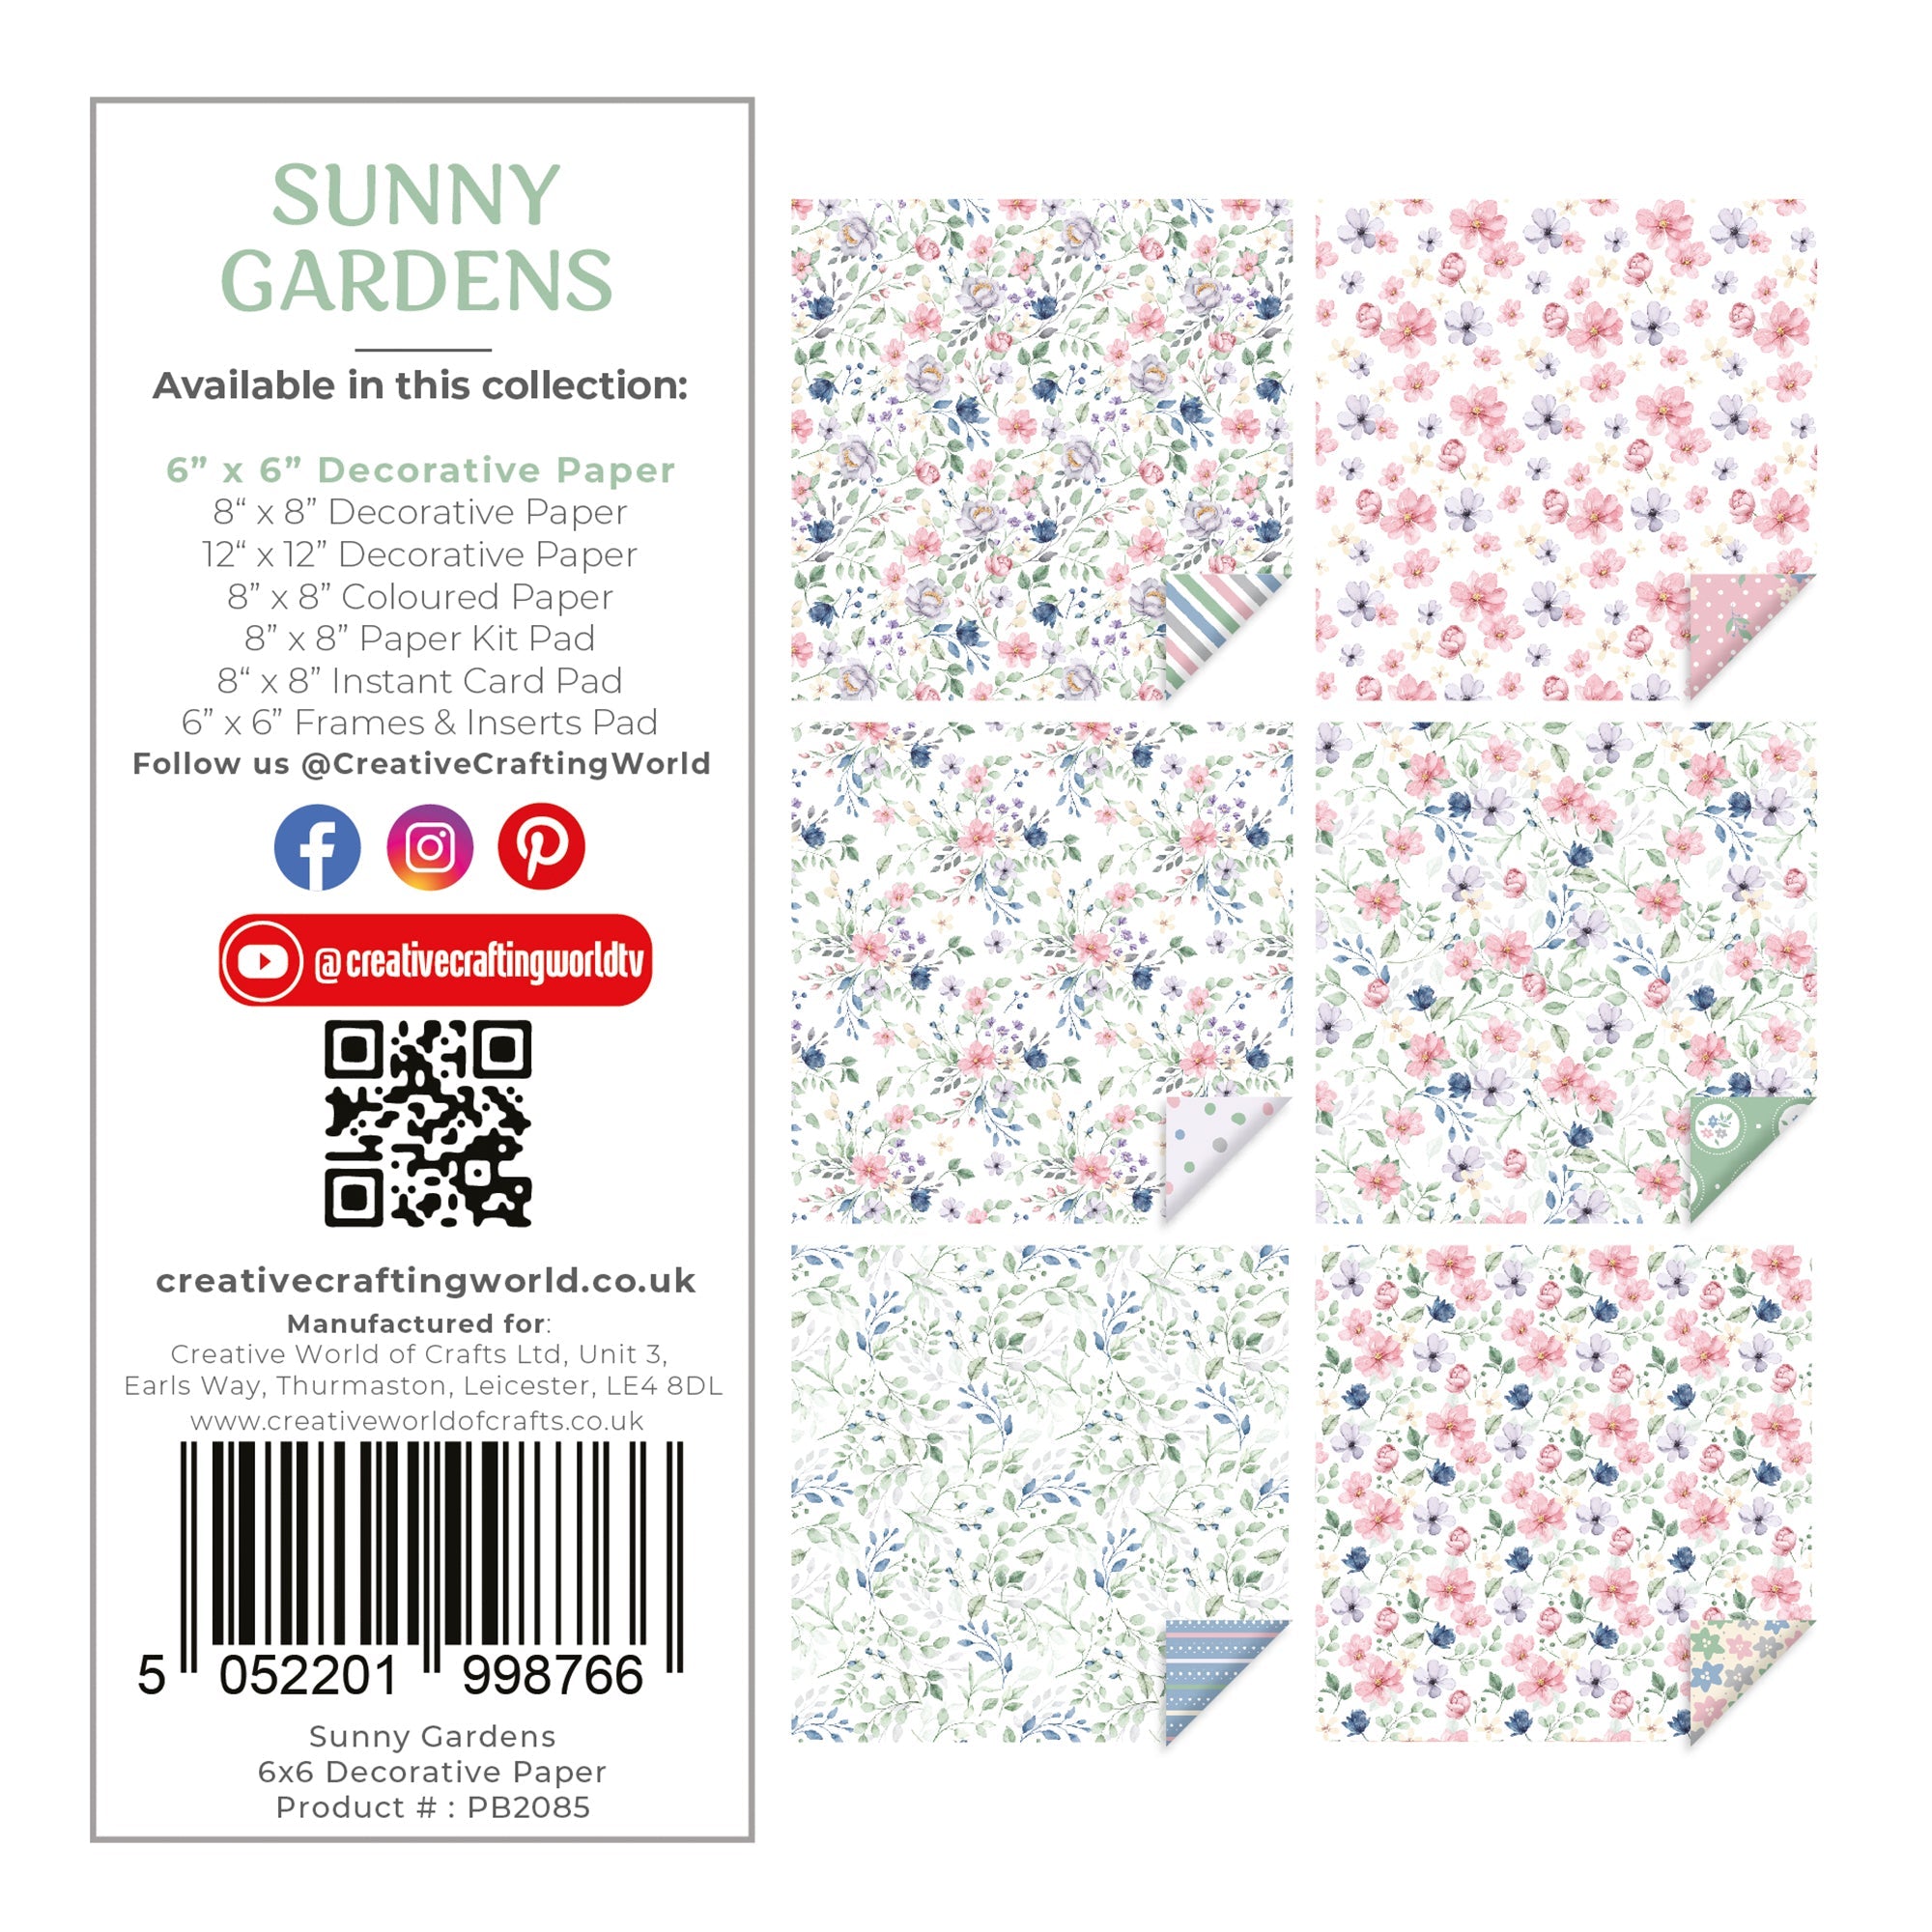 The Paper Boutique Sunny Gardens 6 in x 6 in Decorative Paper Pad